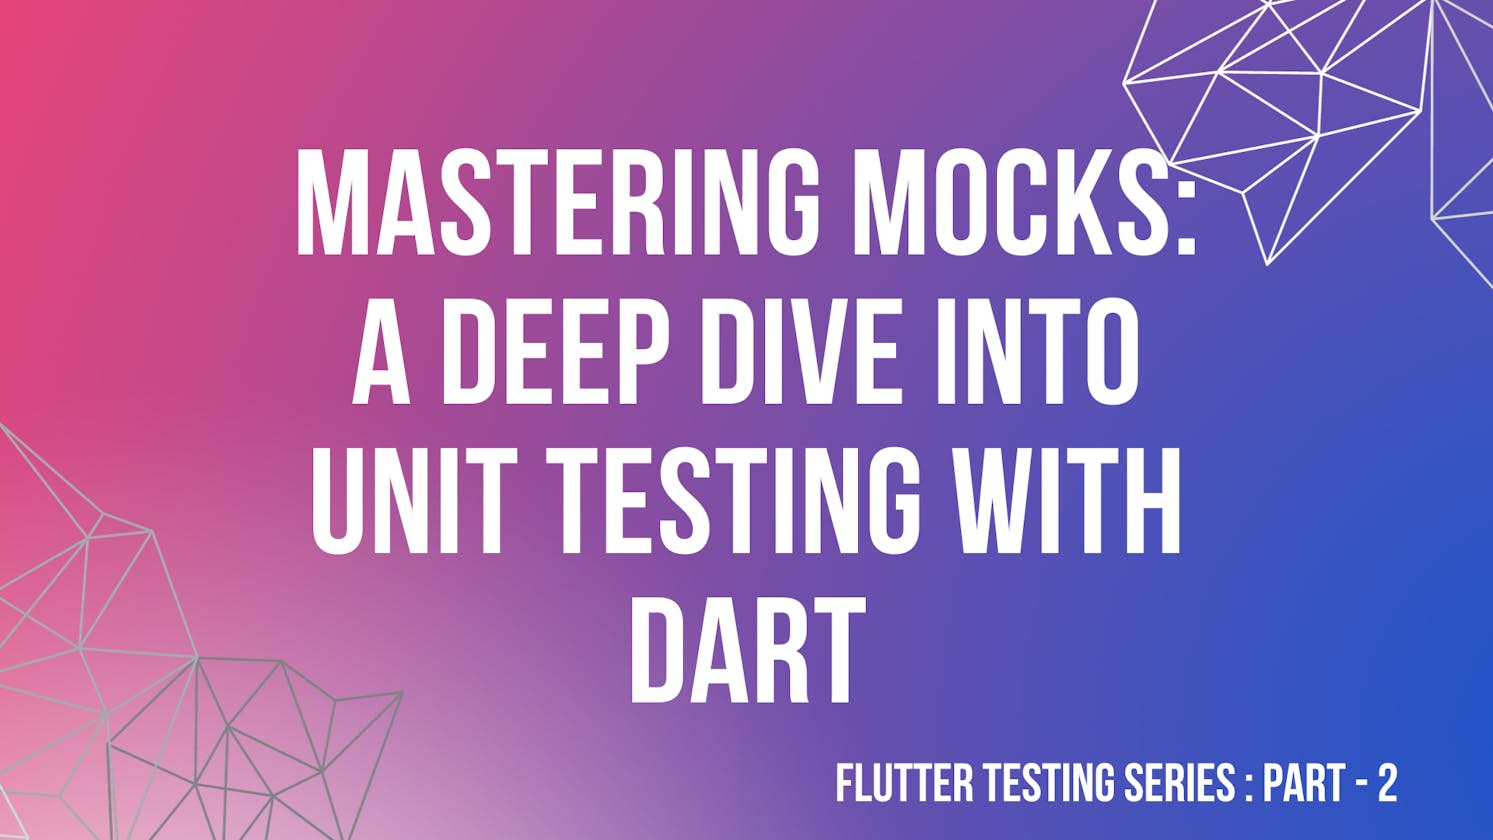 Mastering Mocks: A Deep Dive into Unit Testing with Dart